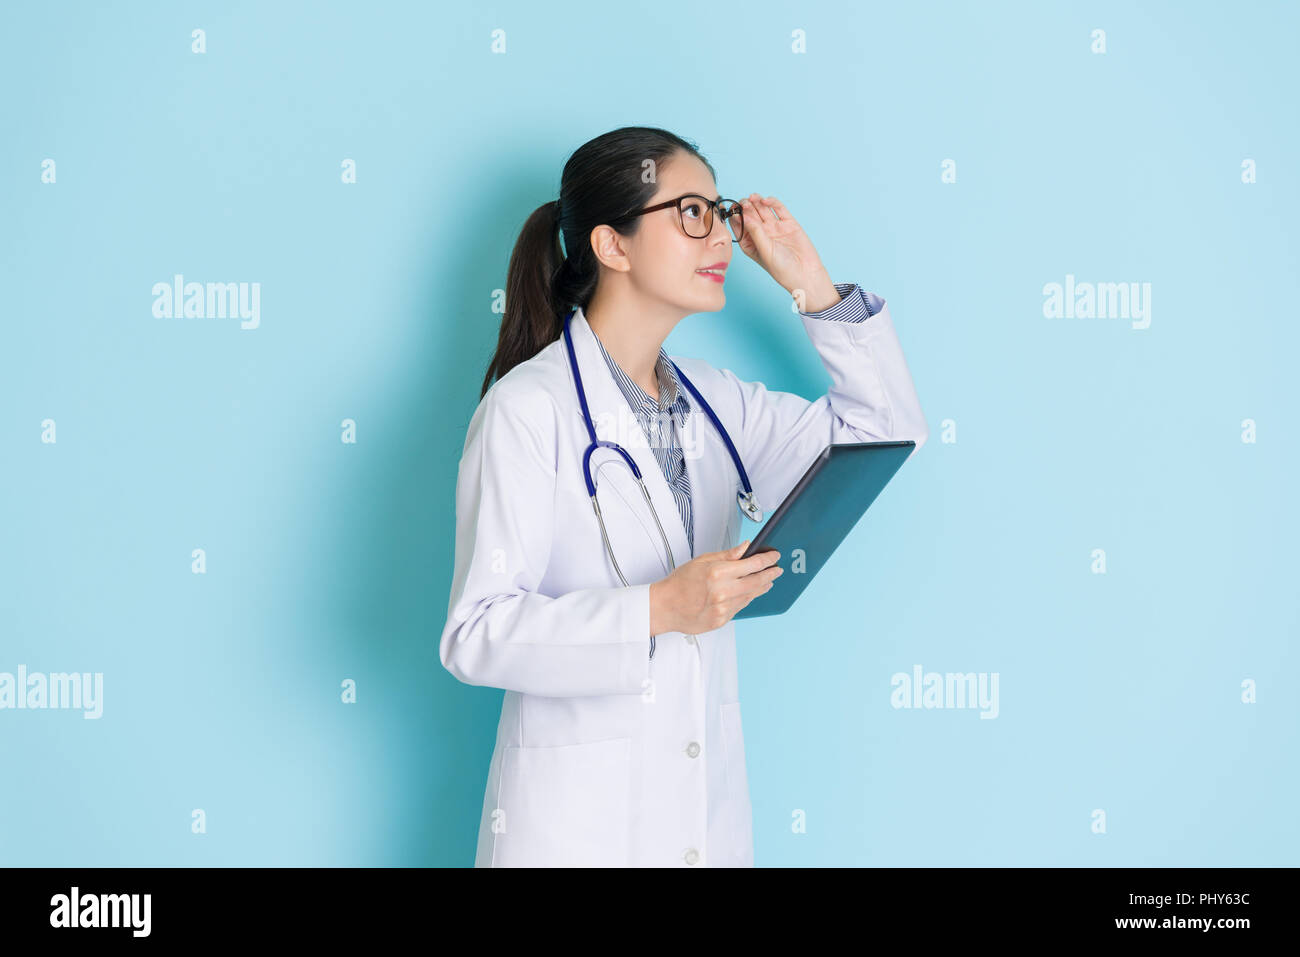 female intern medical student holding her tablet and looking happily with a smile. Stock Photo